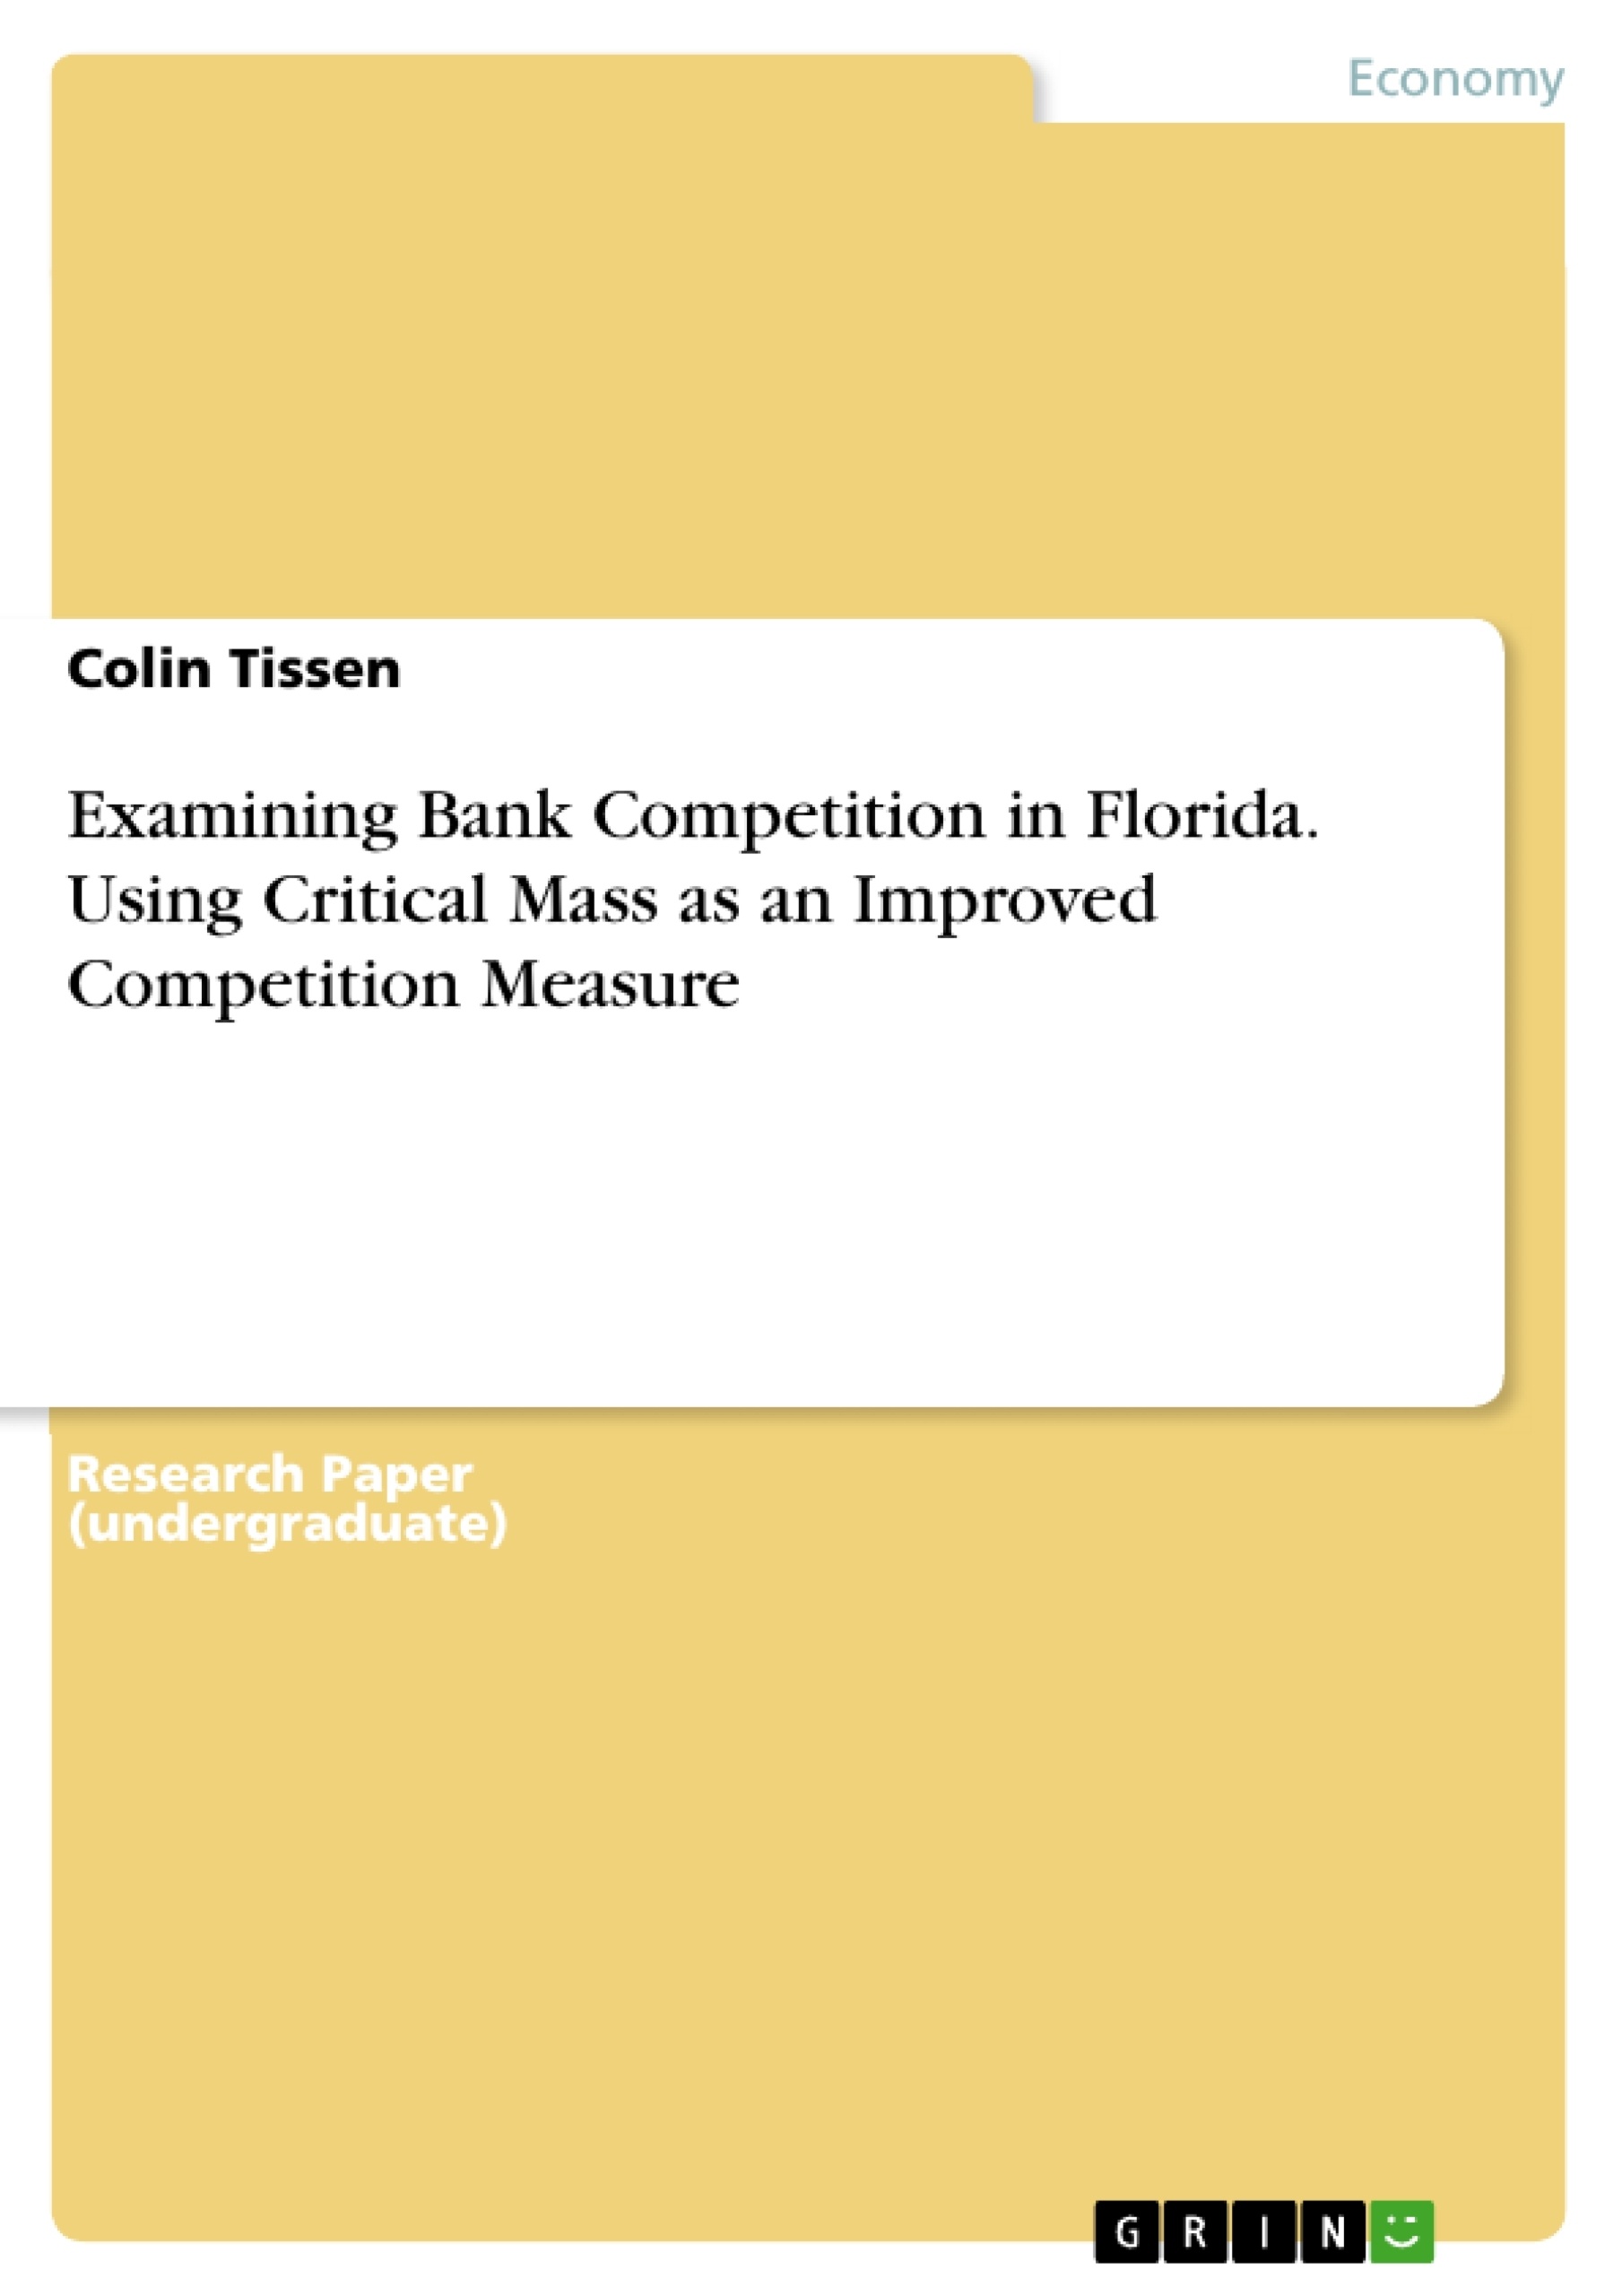 Título: Examining Bank Competition in Florida. Using Critical Mass as an Improved Competition Measure